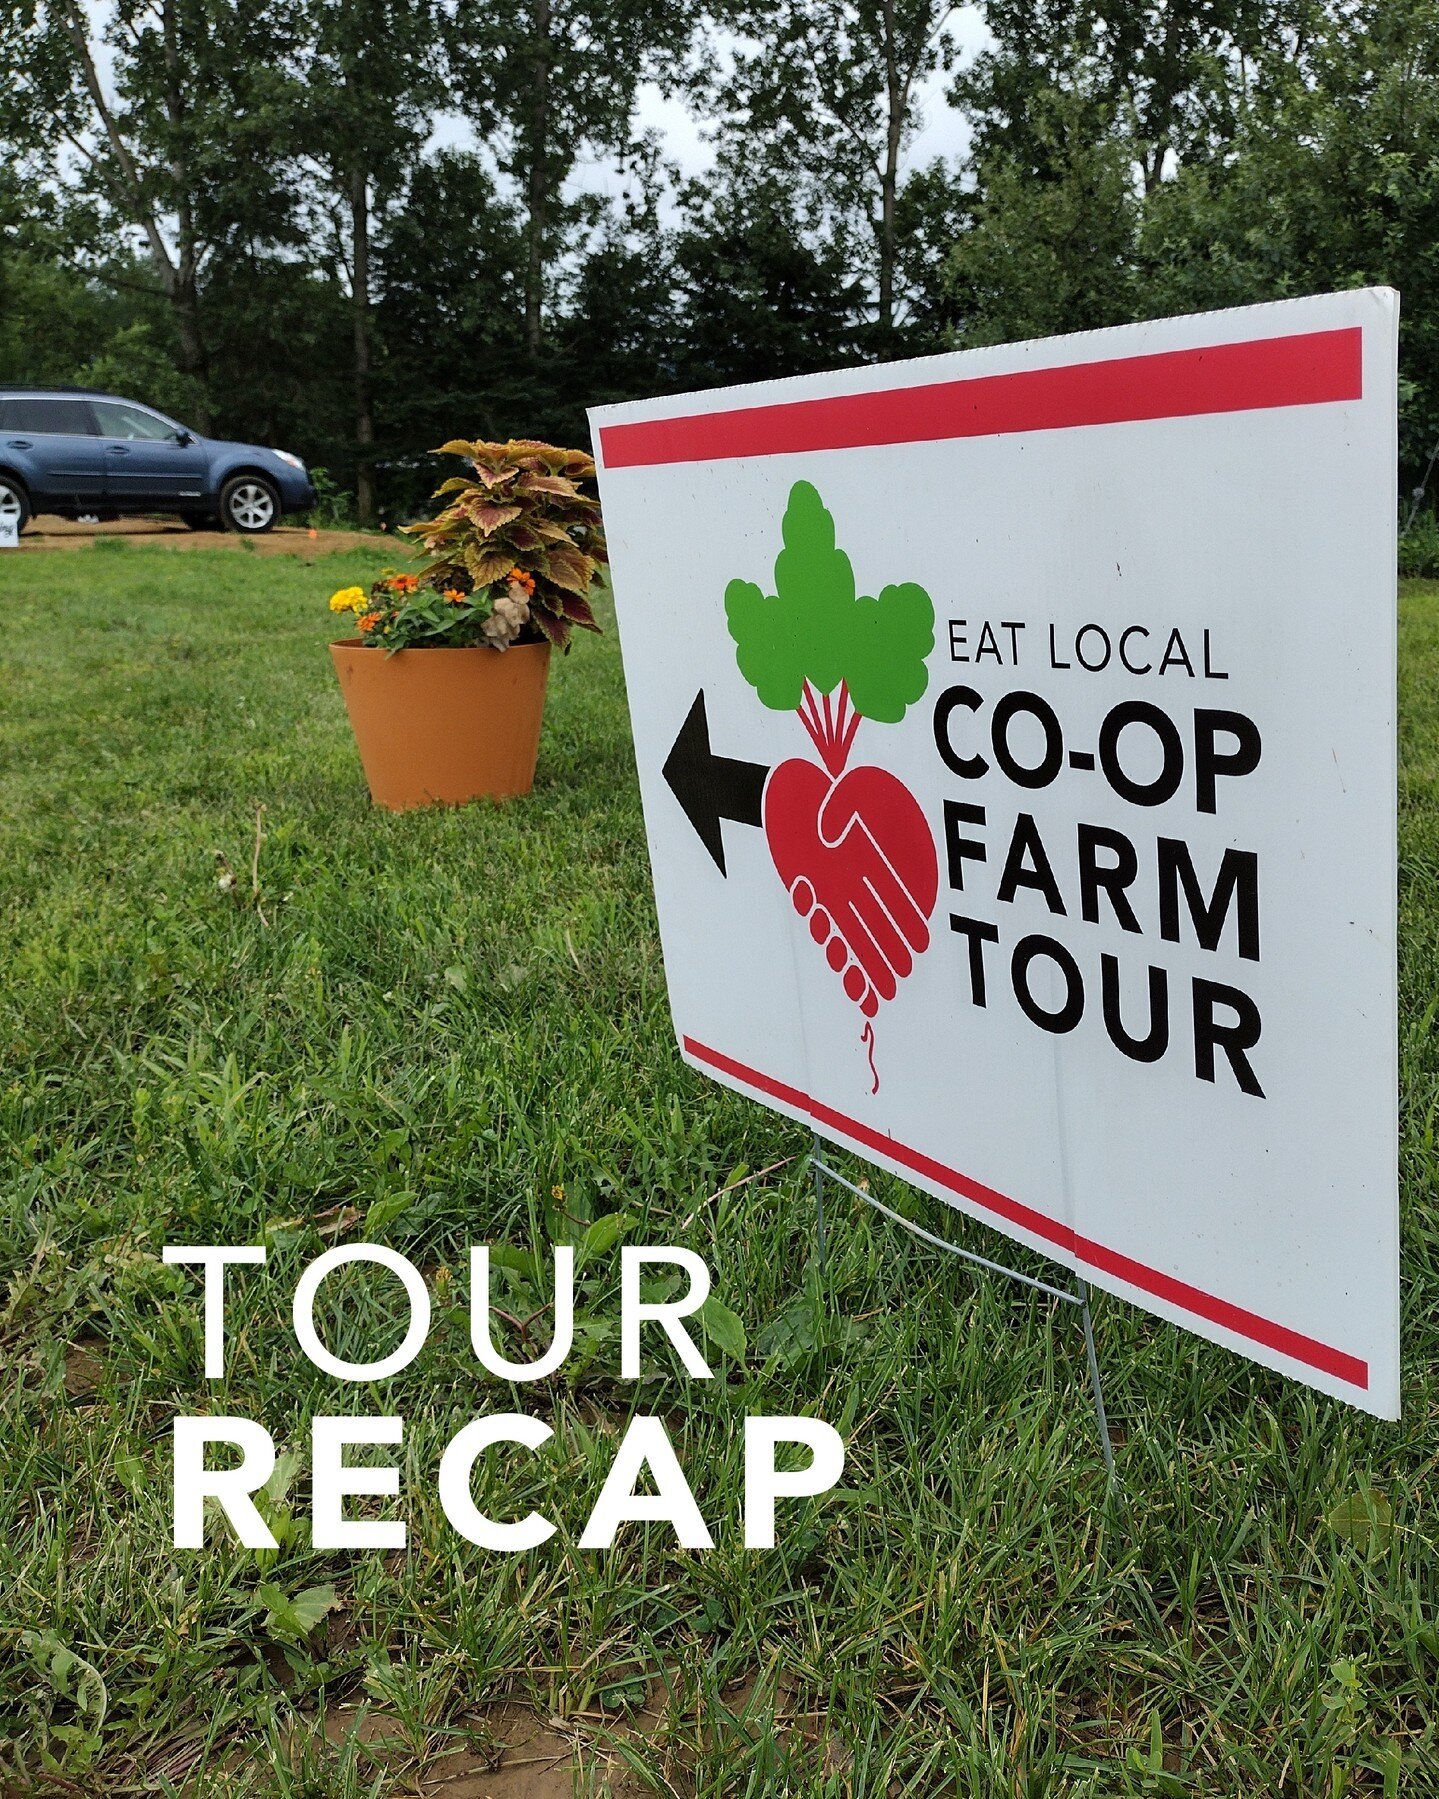 Wow, what a fantastic turnout at this year's Co-op Farm Tour! 🤩 We've crunched the attendance numbers, and they show great excitement and engagement around the event. For example:

🗺️ There were 21 featured farms on the tour from 5 distinct regions